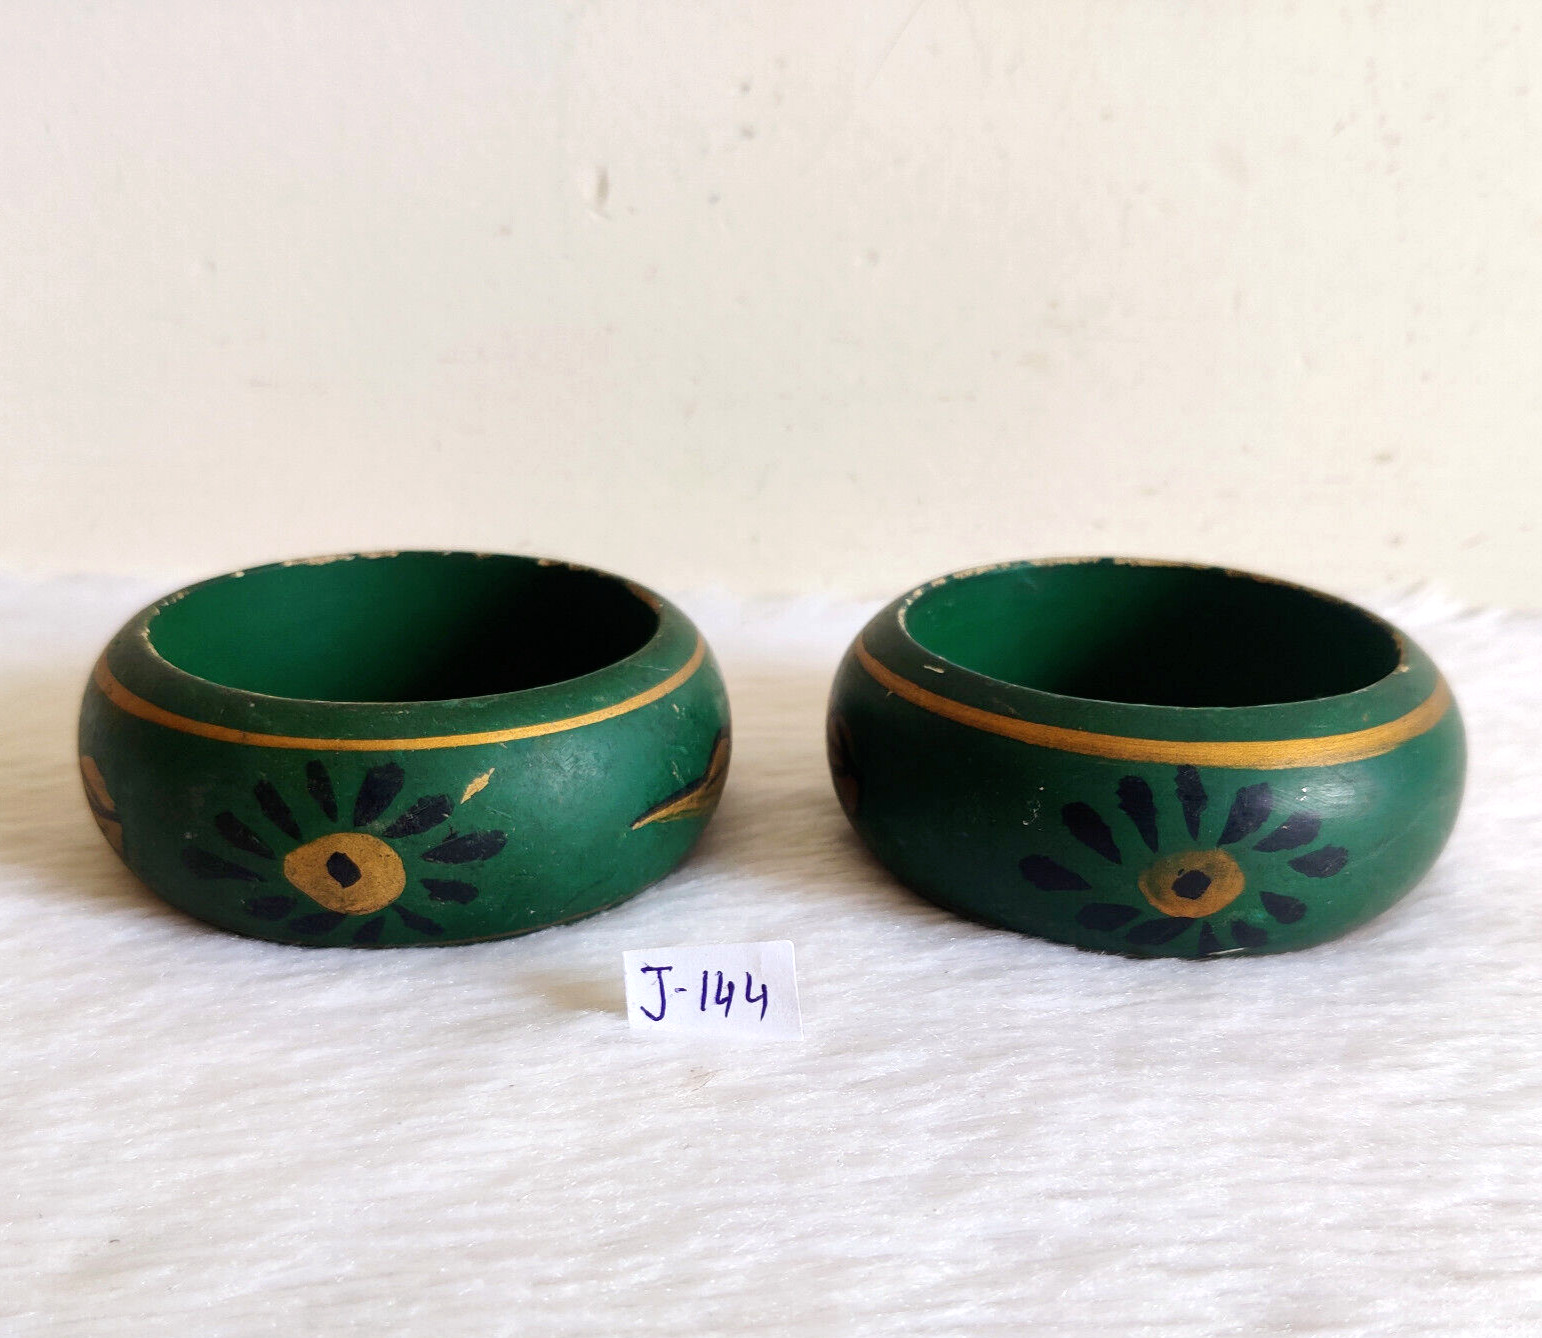 Vintage Handmade Hand Painted Wooden Lacquered Tribal Bangle Bracelet Pair J144